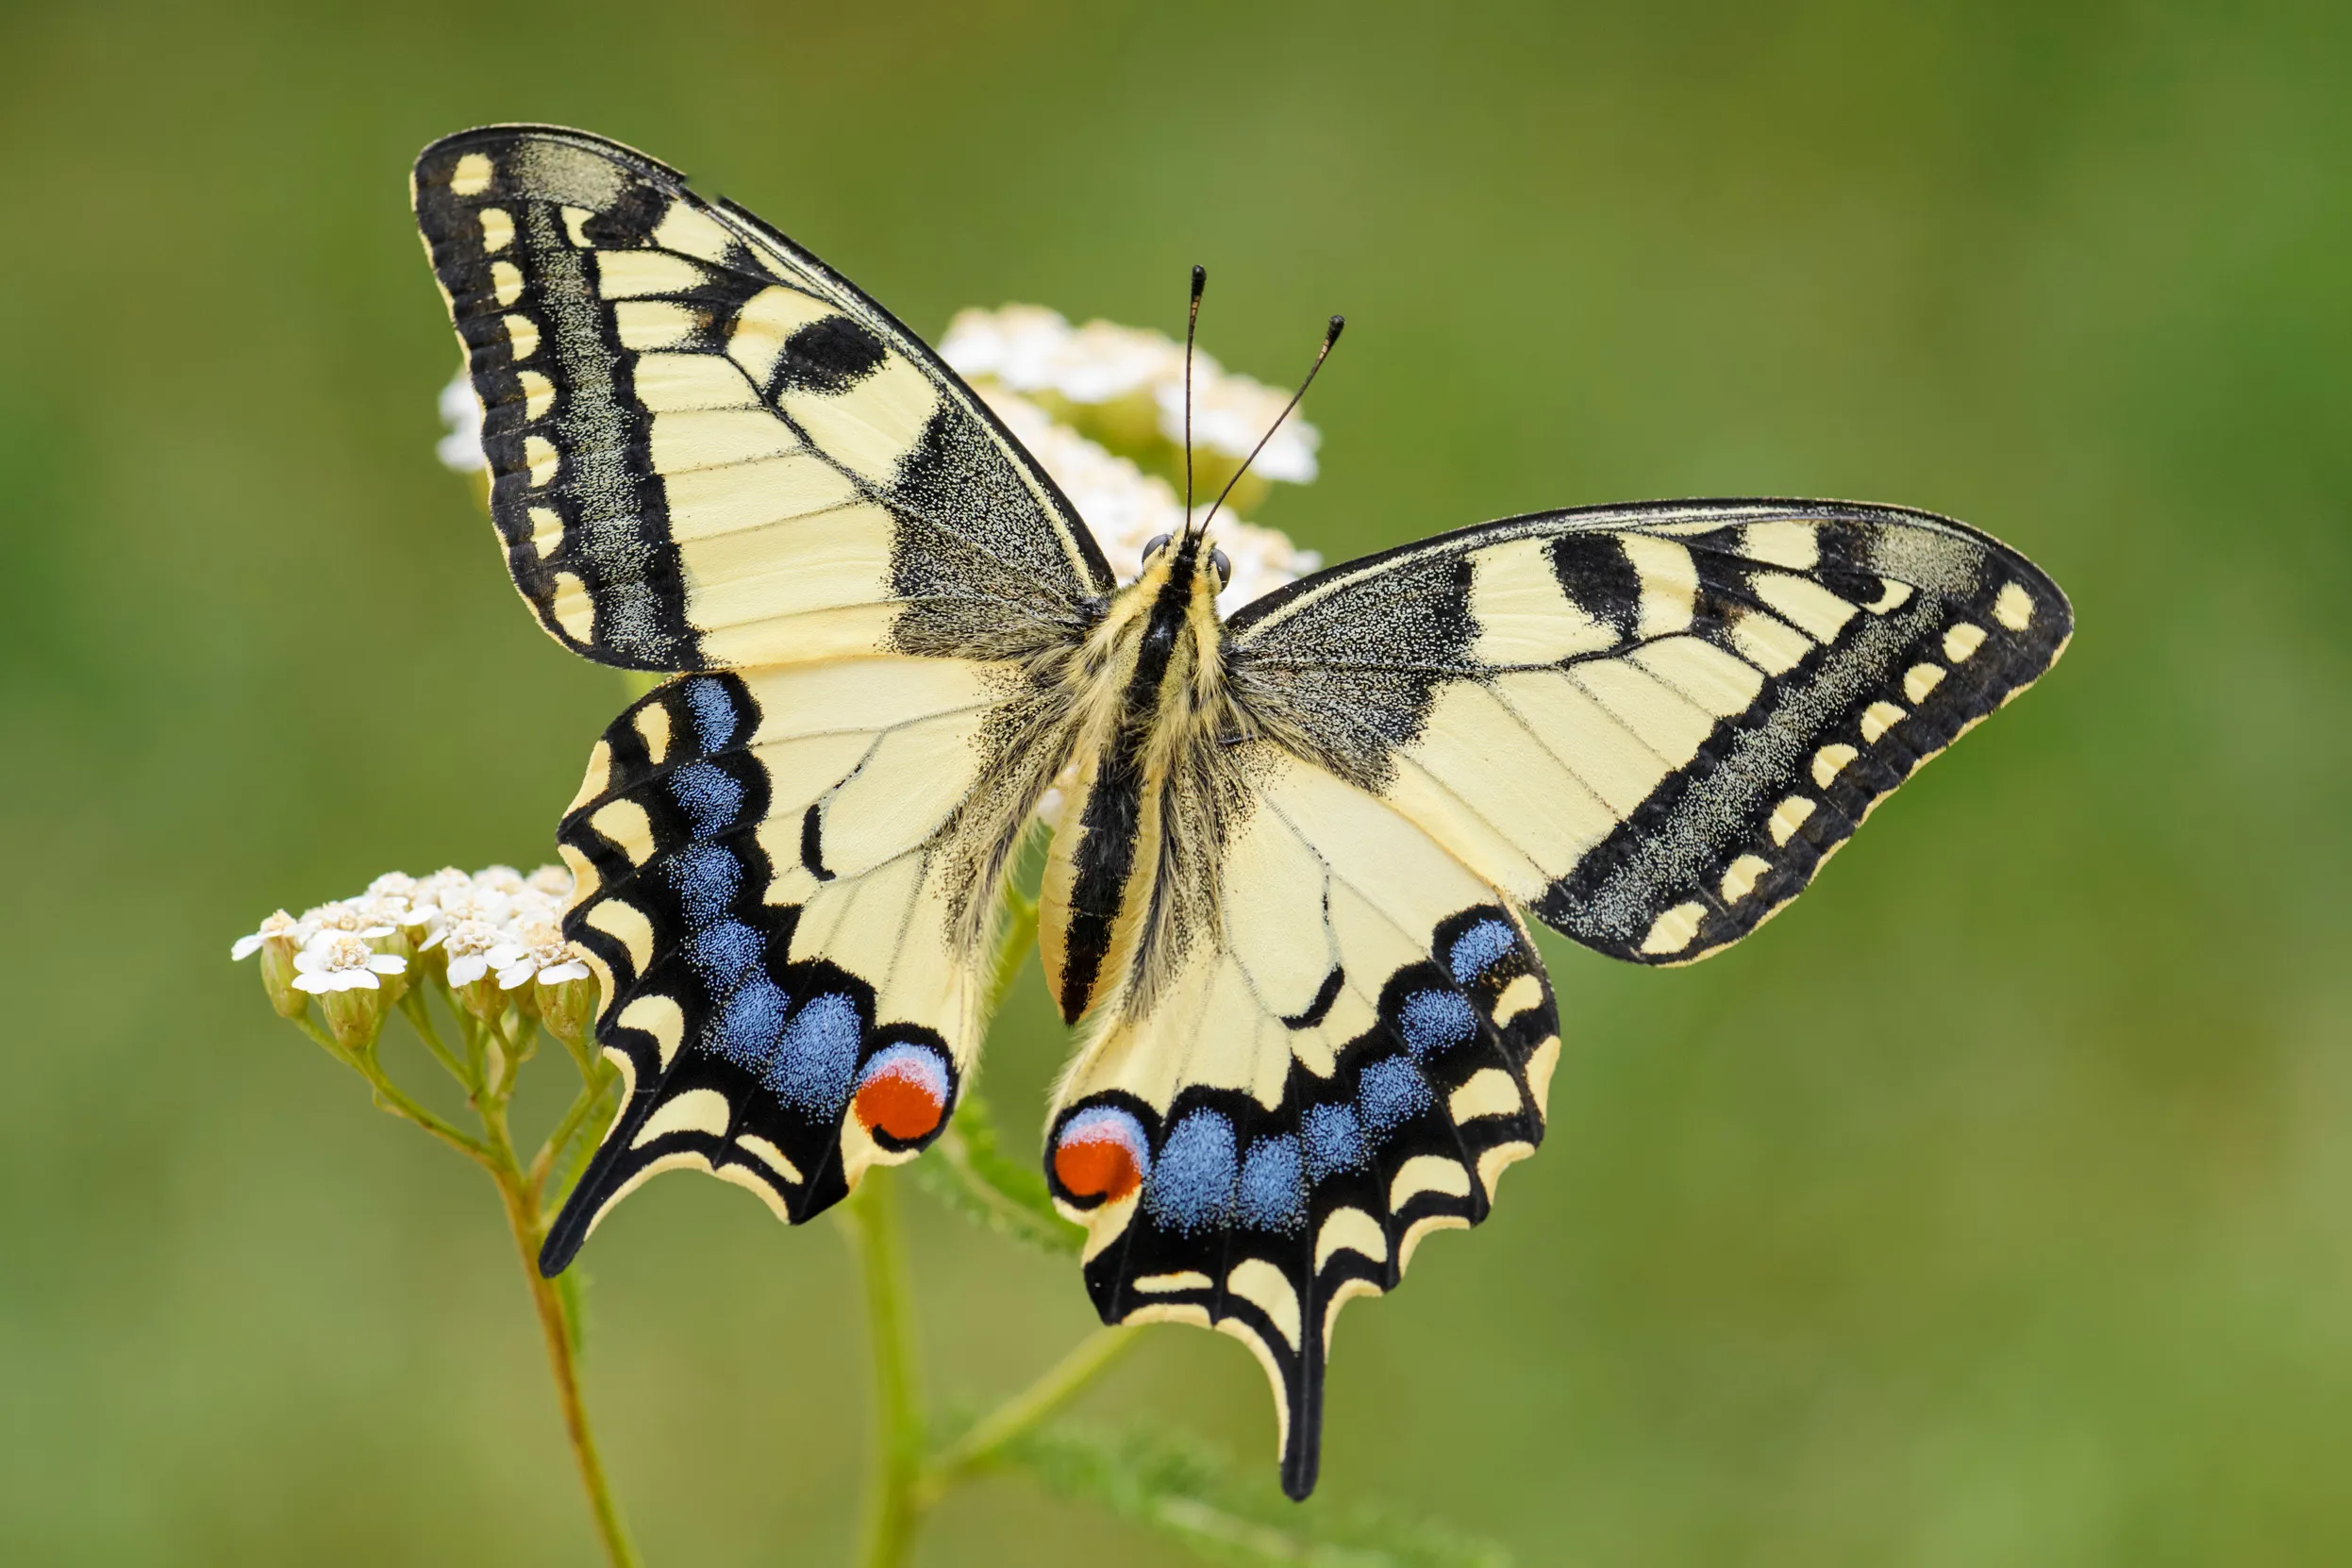 A Swallowtail Butterfly perched on a flower.